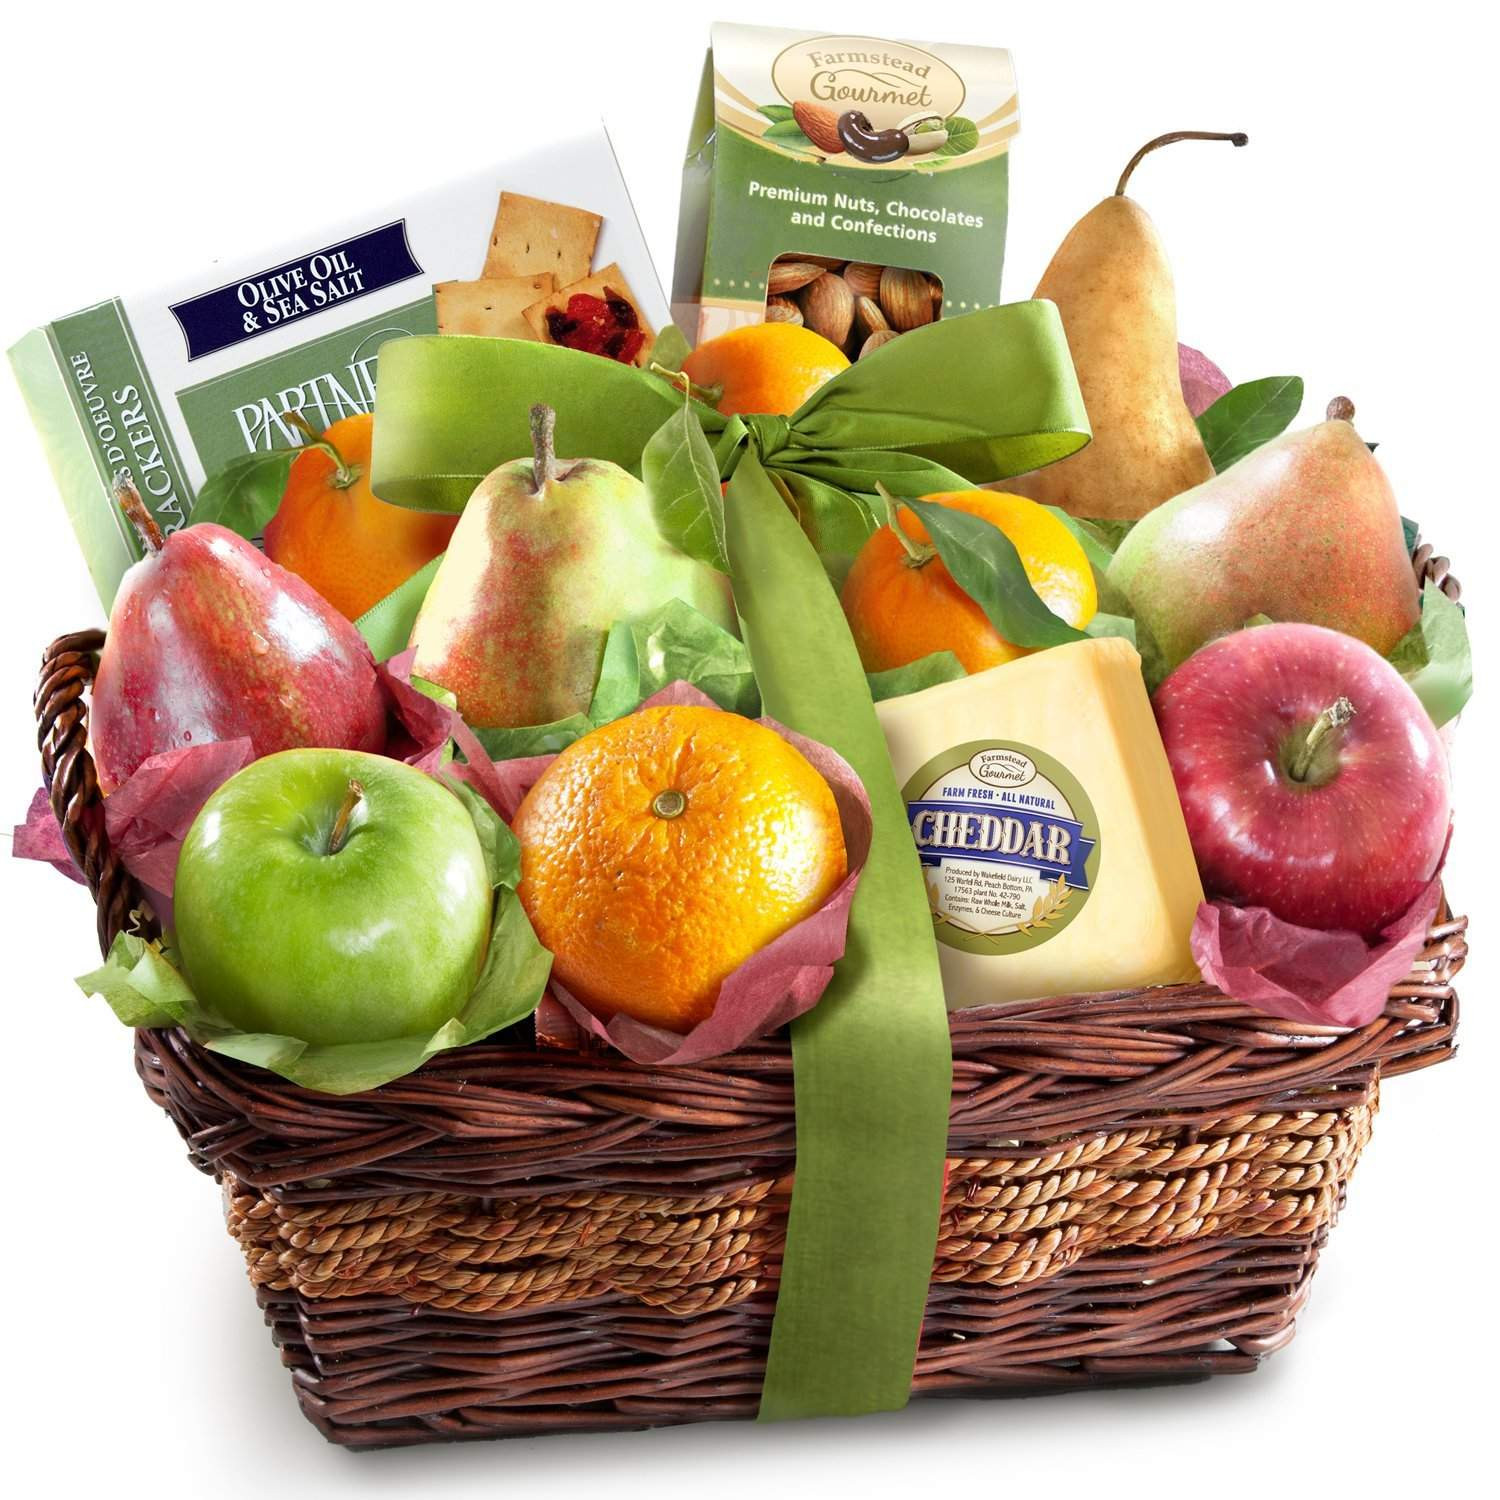 Christmas Food Gifts Baskets
 Top 20 Best Cheese Gift Baskets